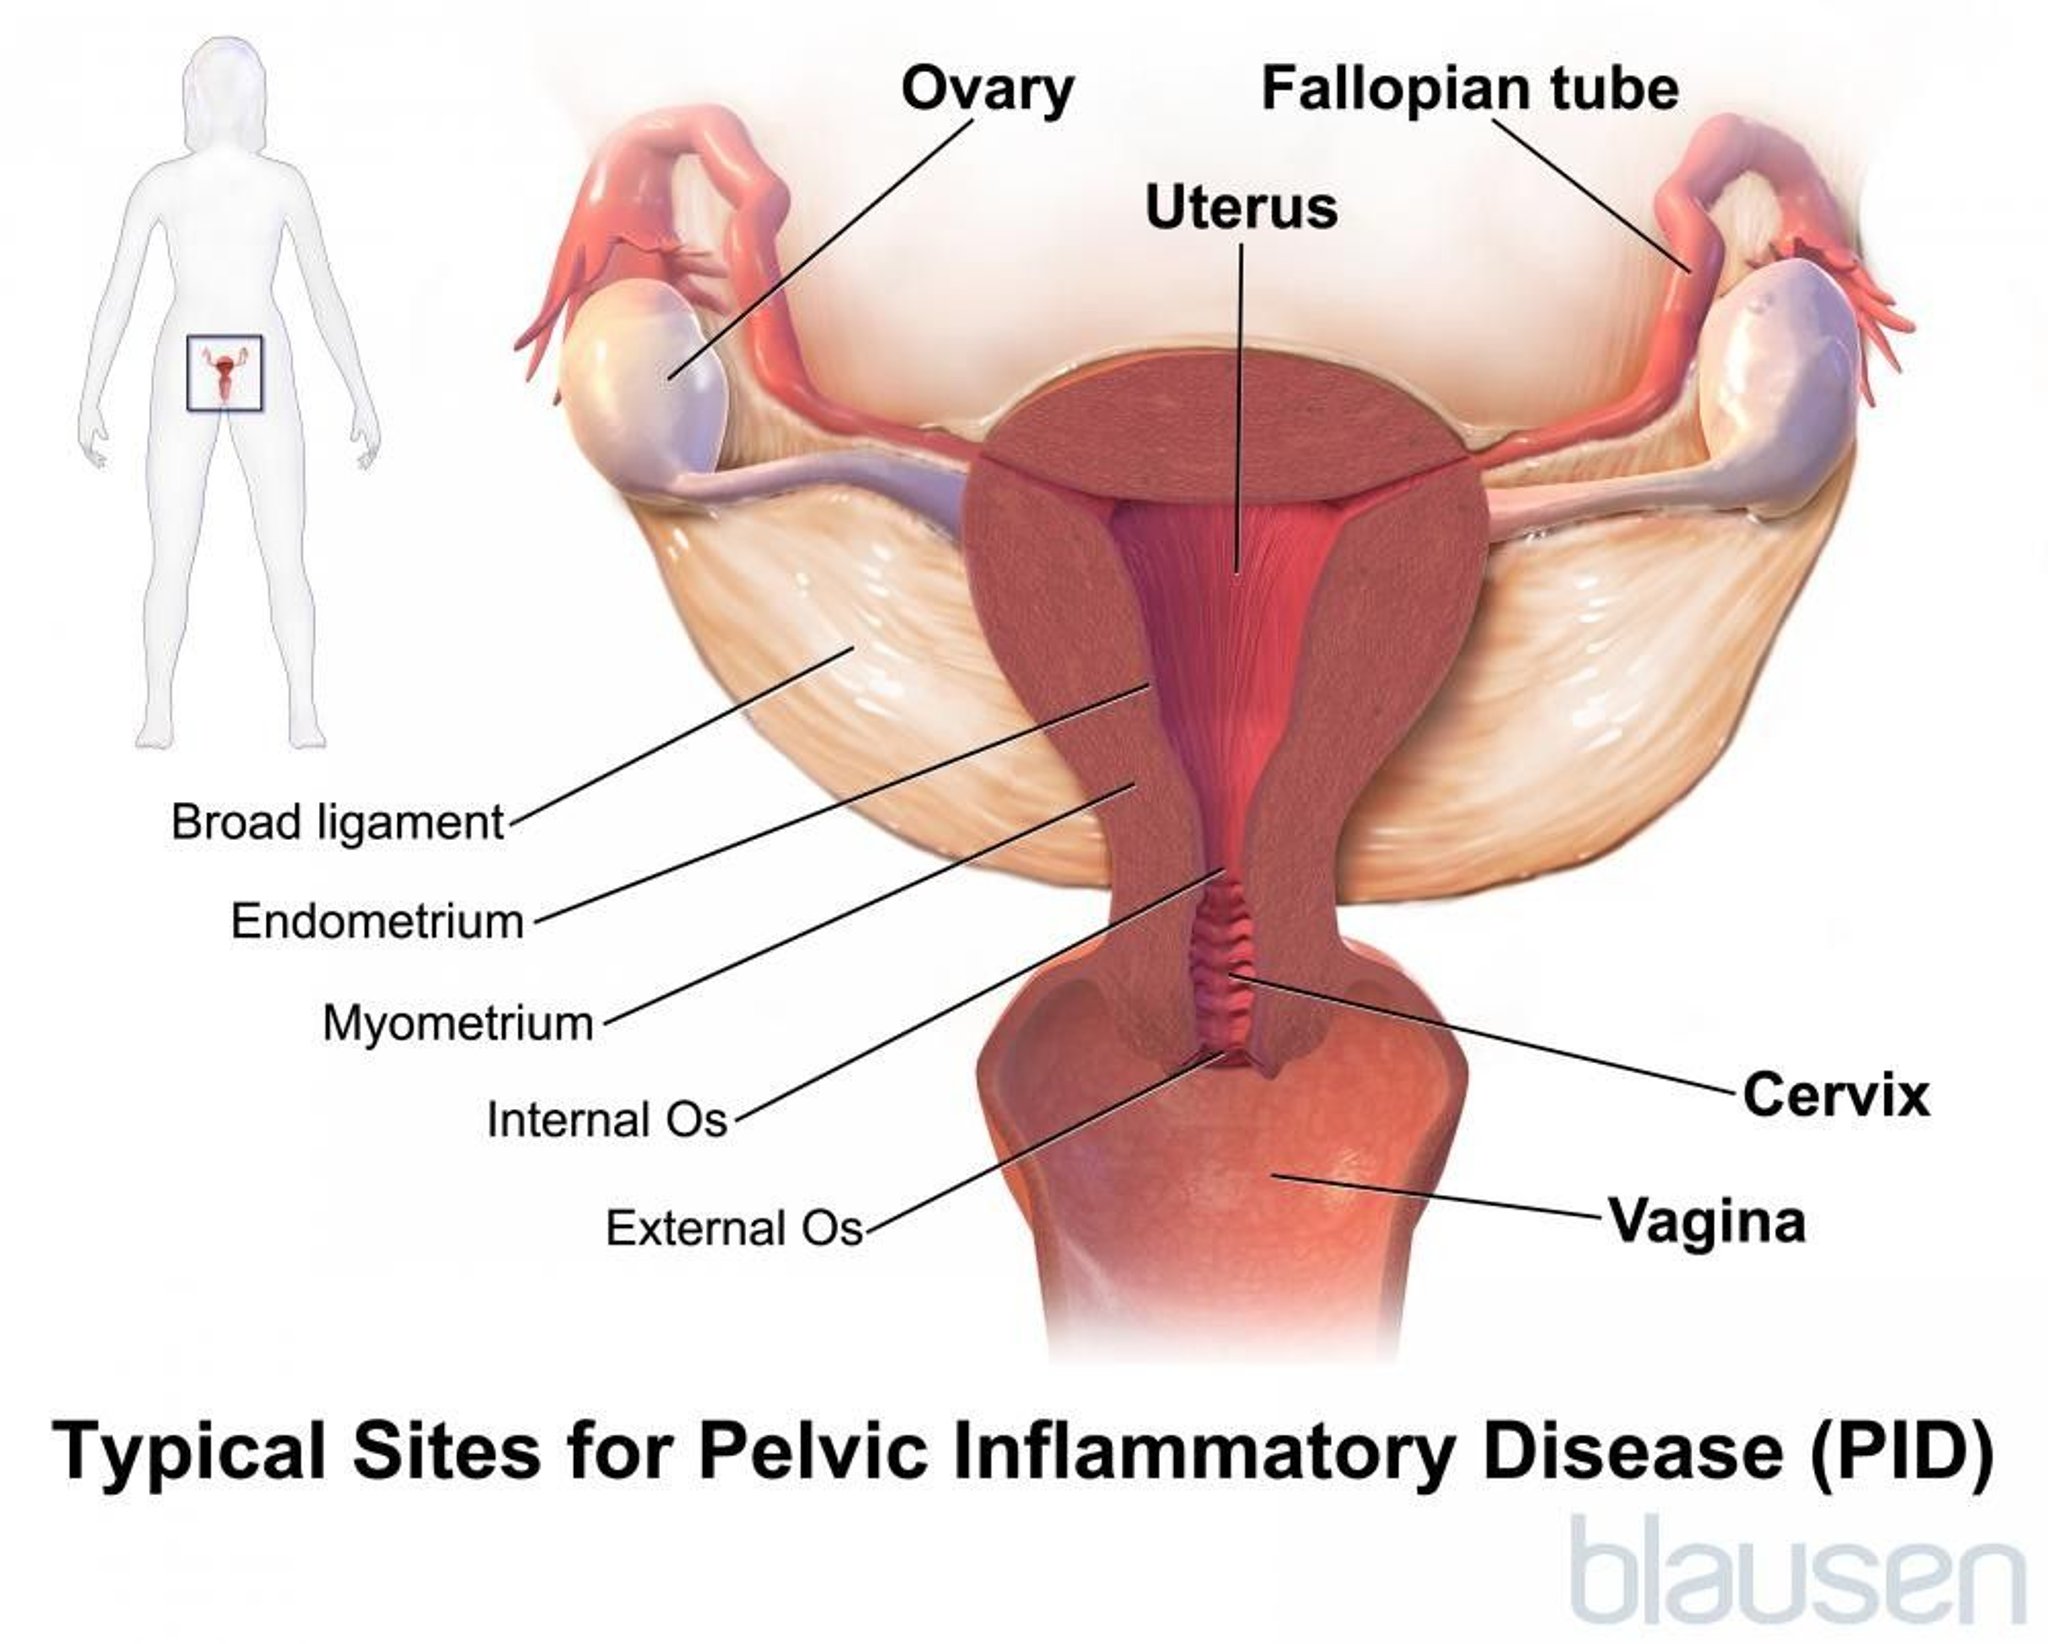 Typical Sites for Pelvic Inflammatory Disease